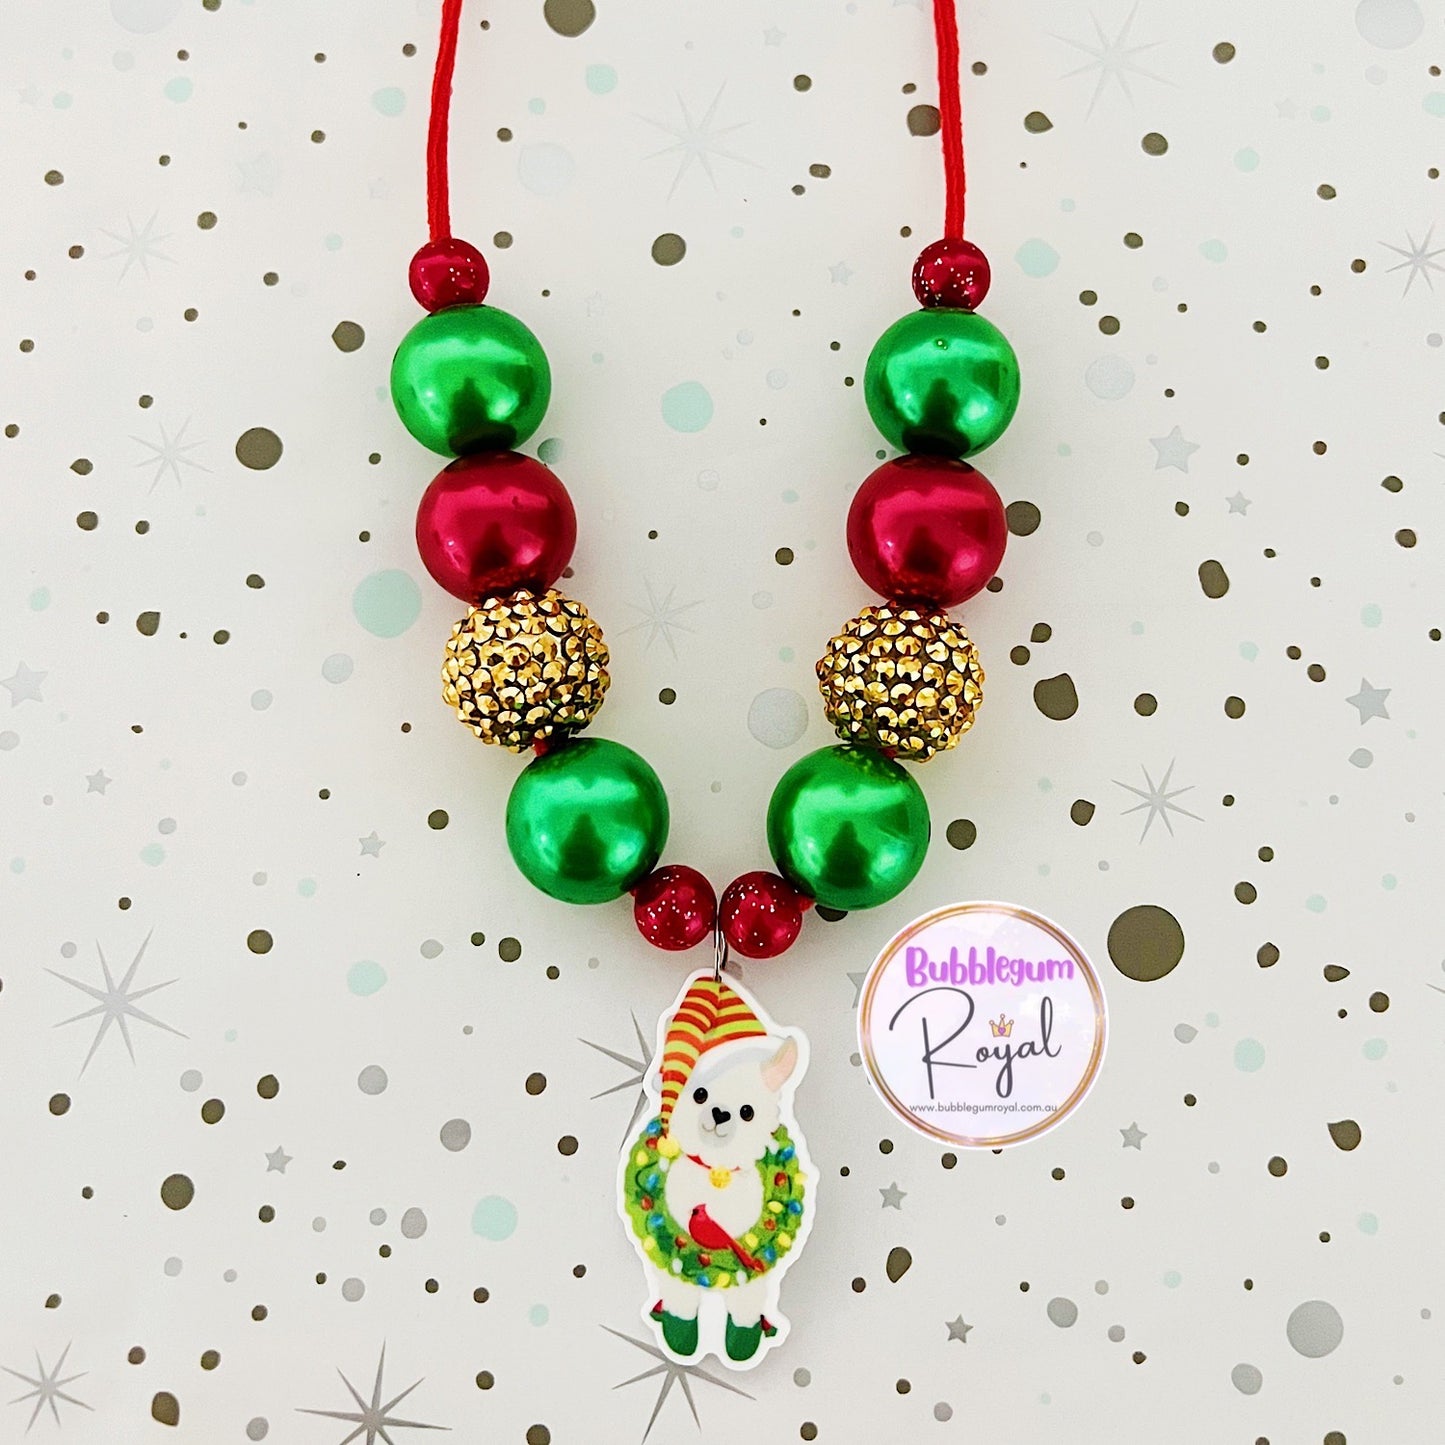 Christmas Lama - Personalised Bauble - Necklace or DIY Kit